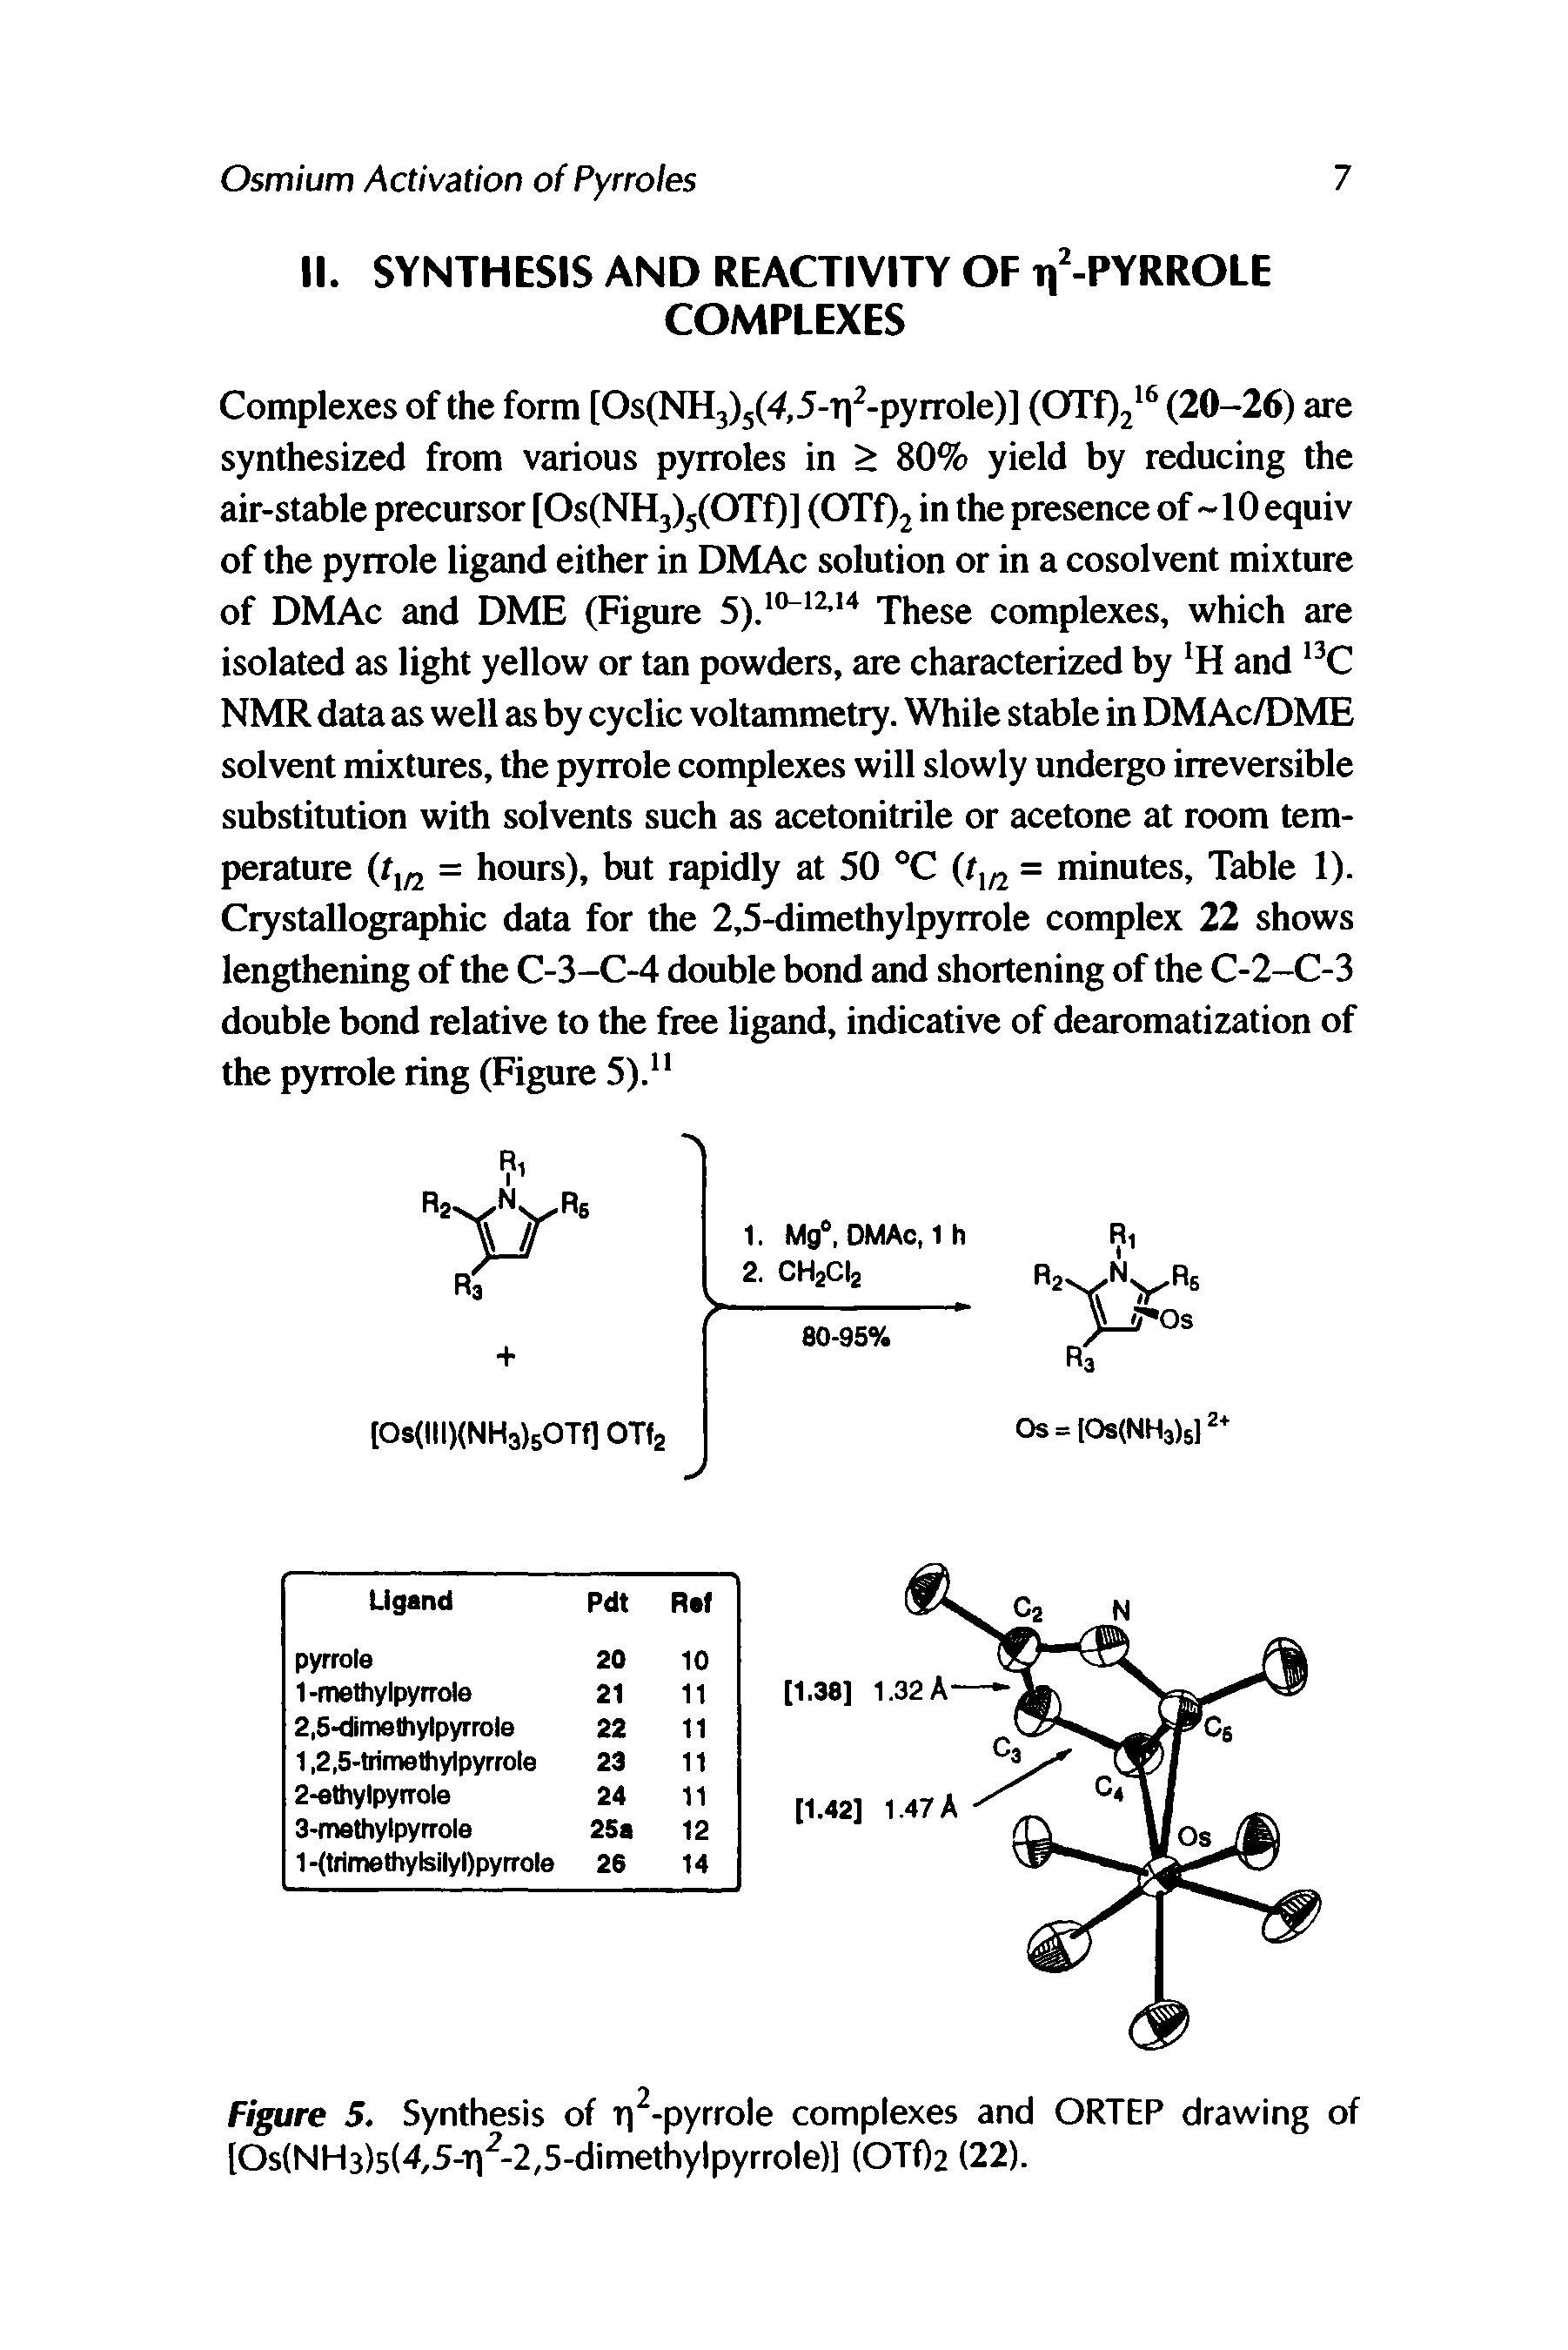 Figure 5. Synthesis of rj -pyrrole complexes and ORTEP drawing of [Os(NH3)5(4/5-ri2-2,5-dimethylpyrrole)] (OTf)2 (22).